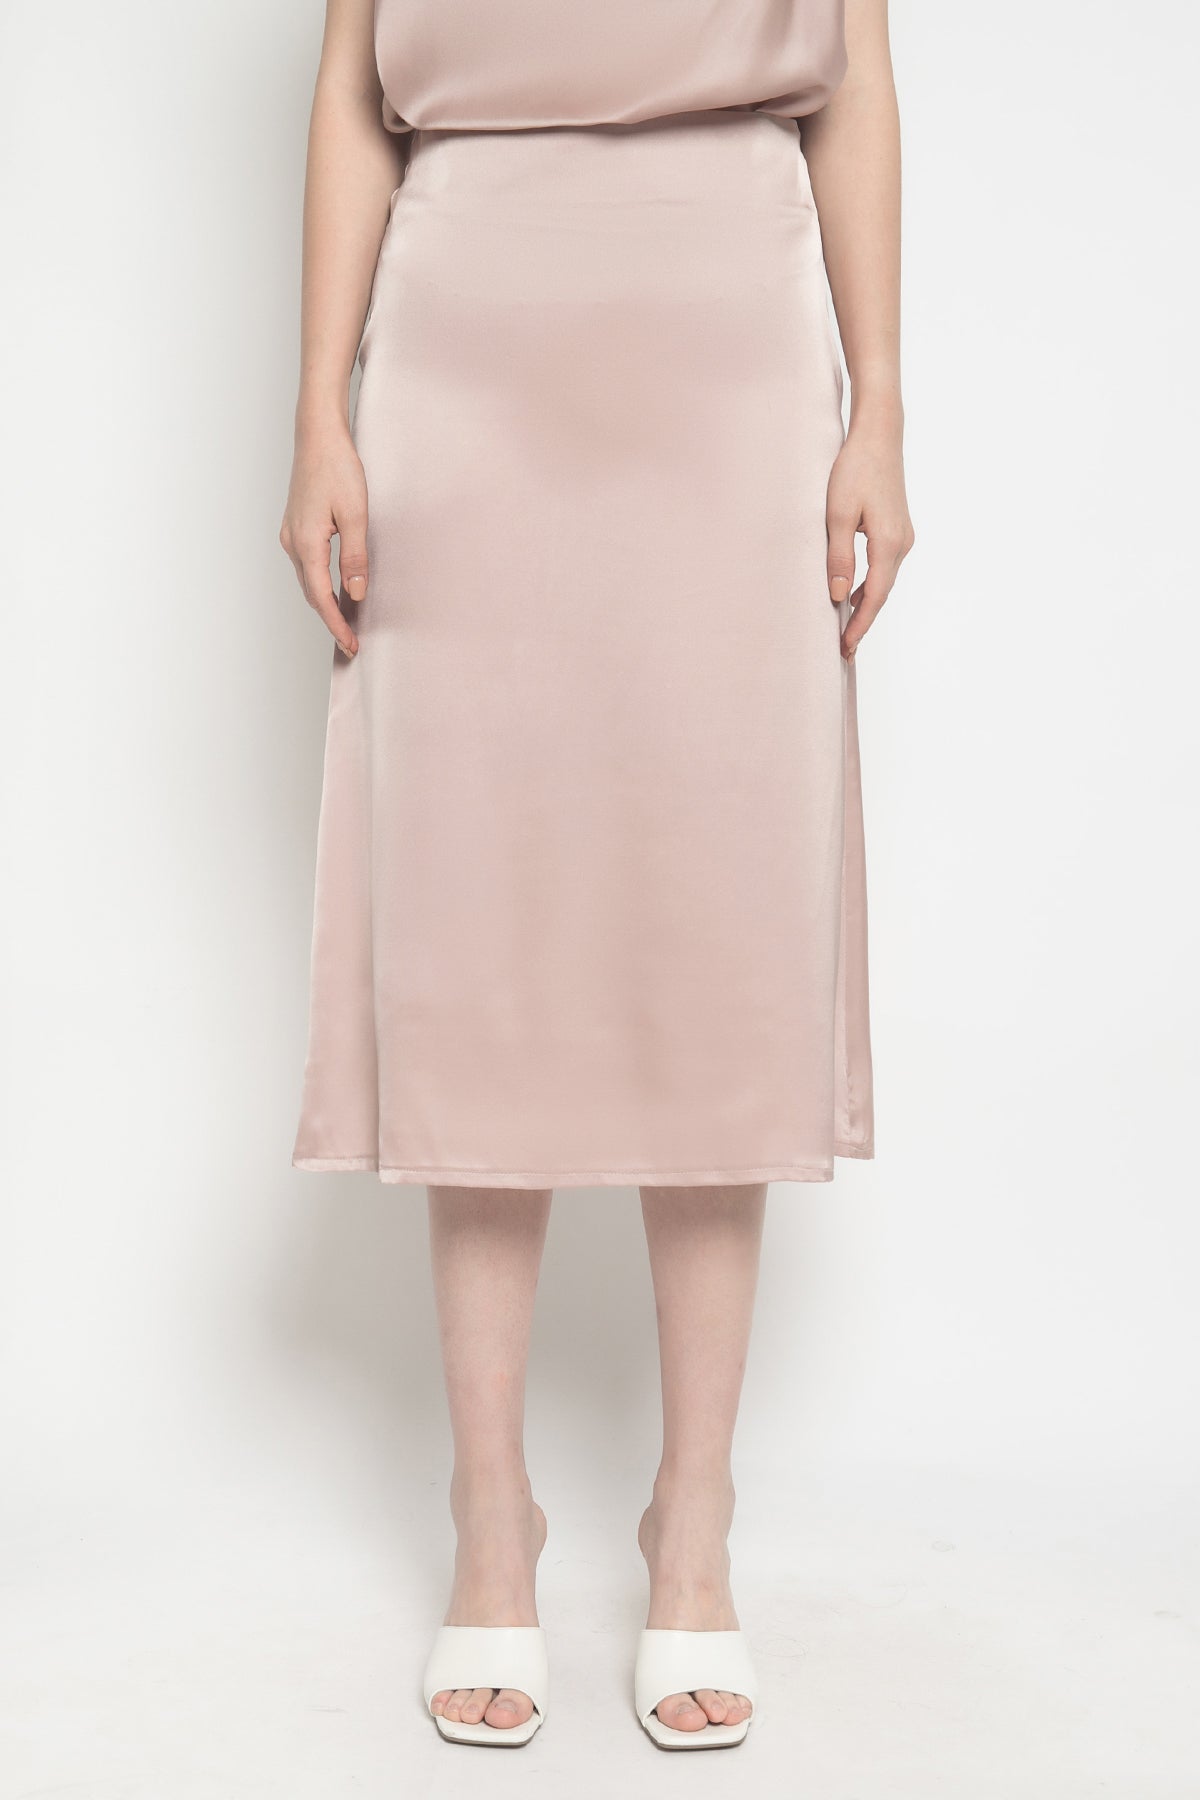 Constance Skirt in Dusty Pink